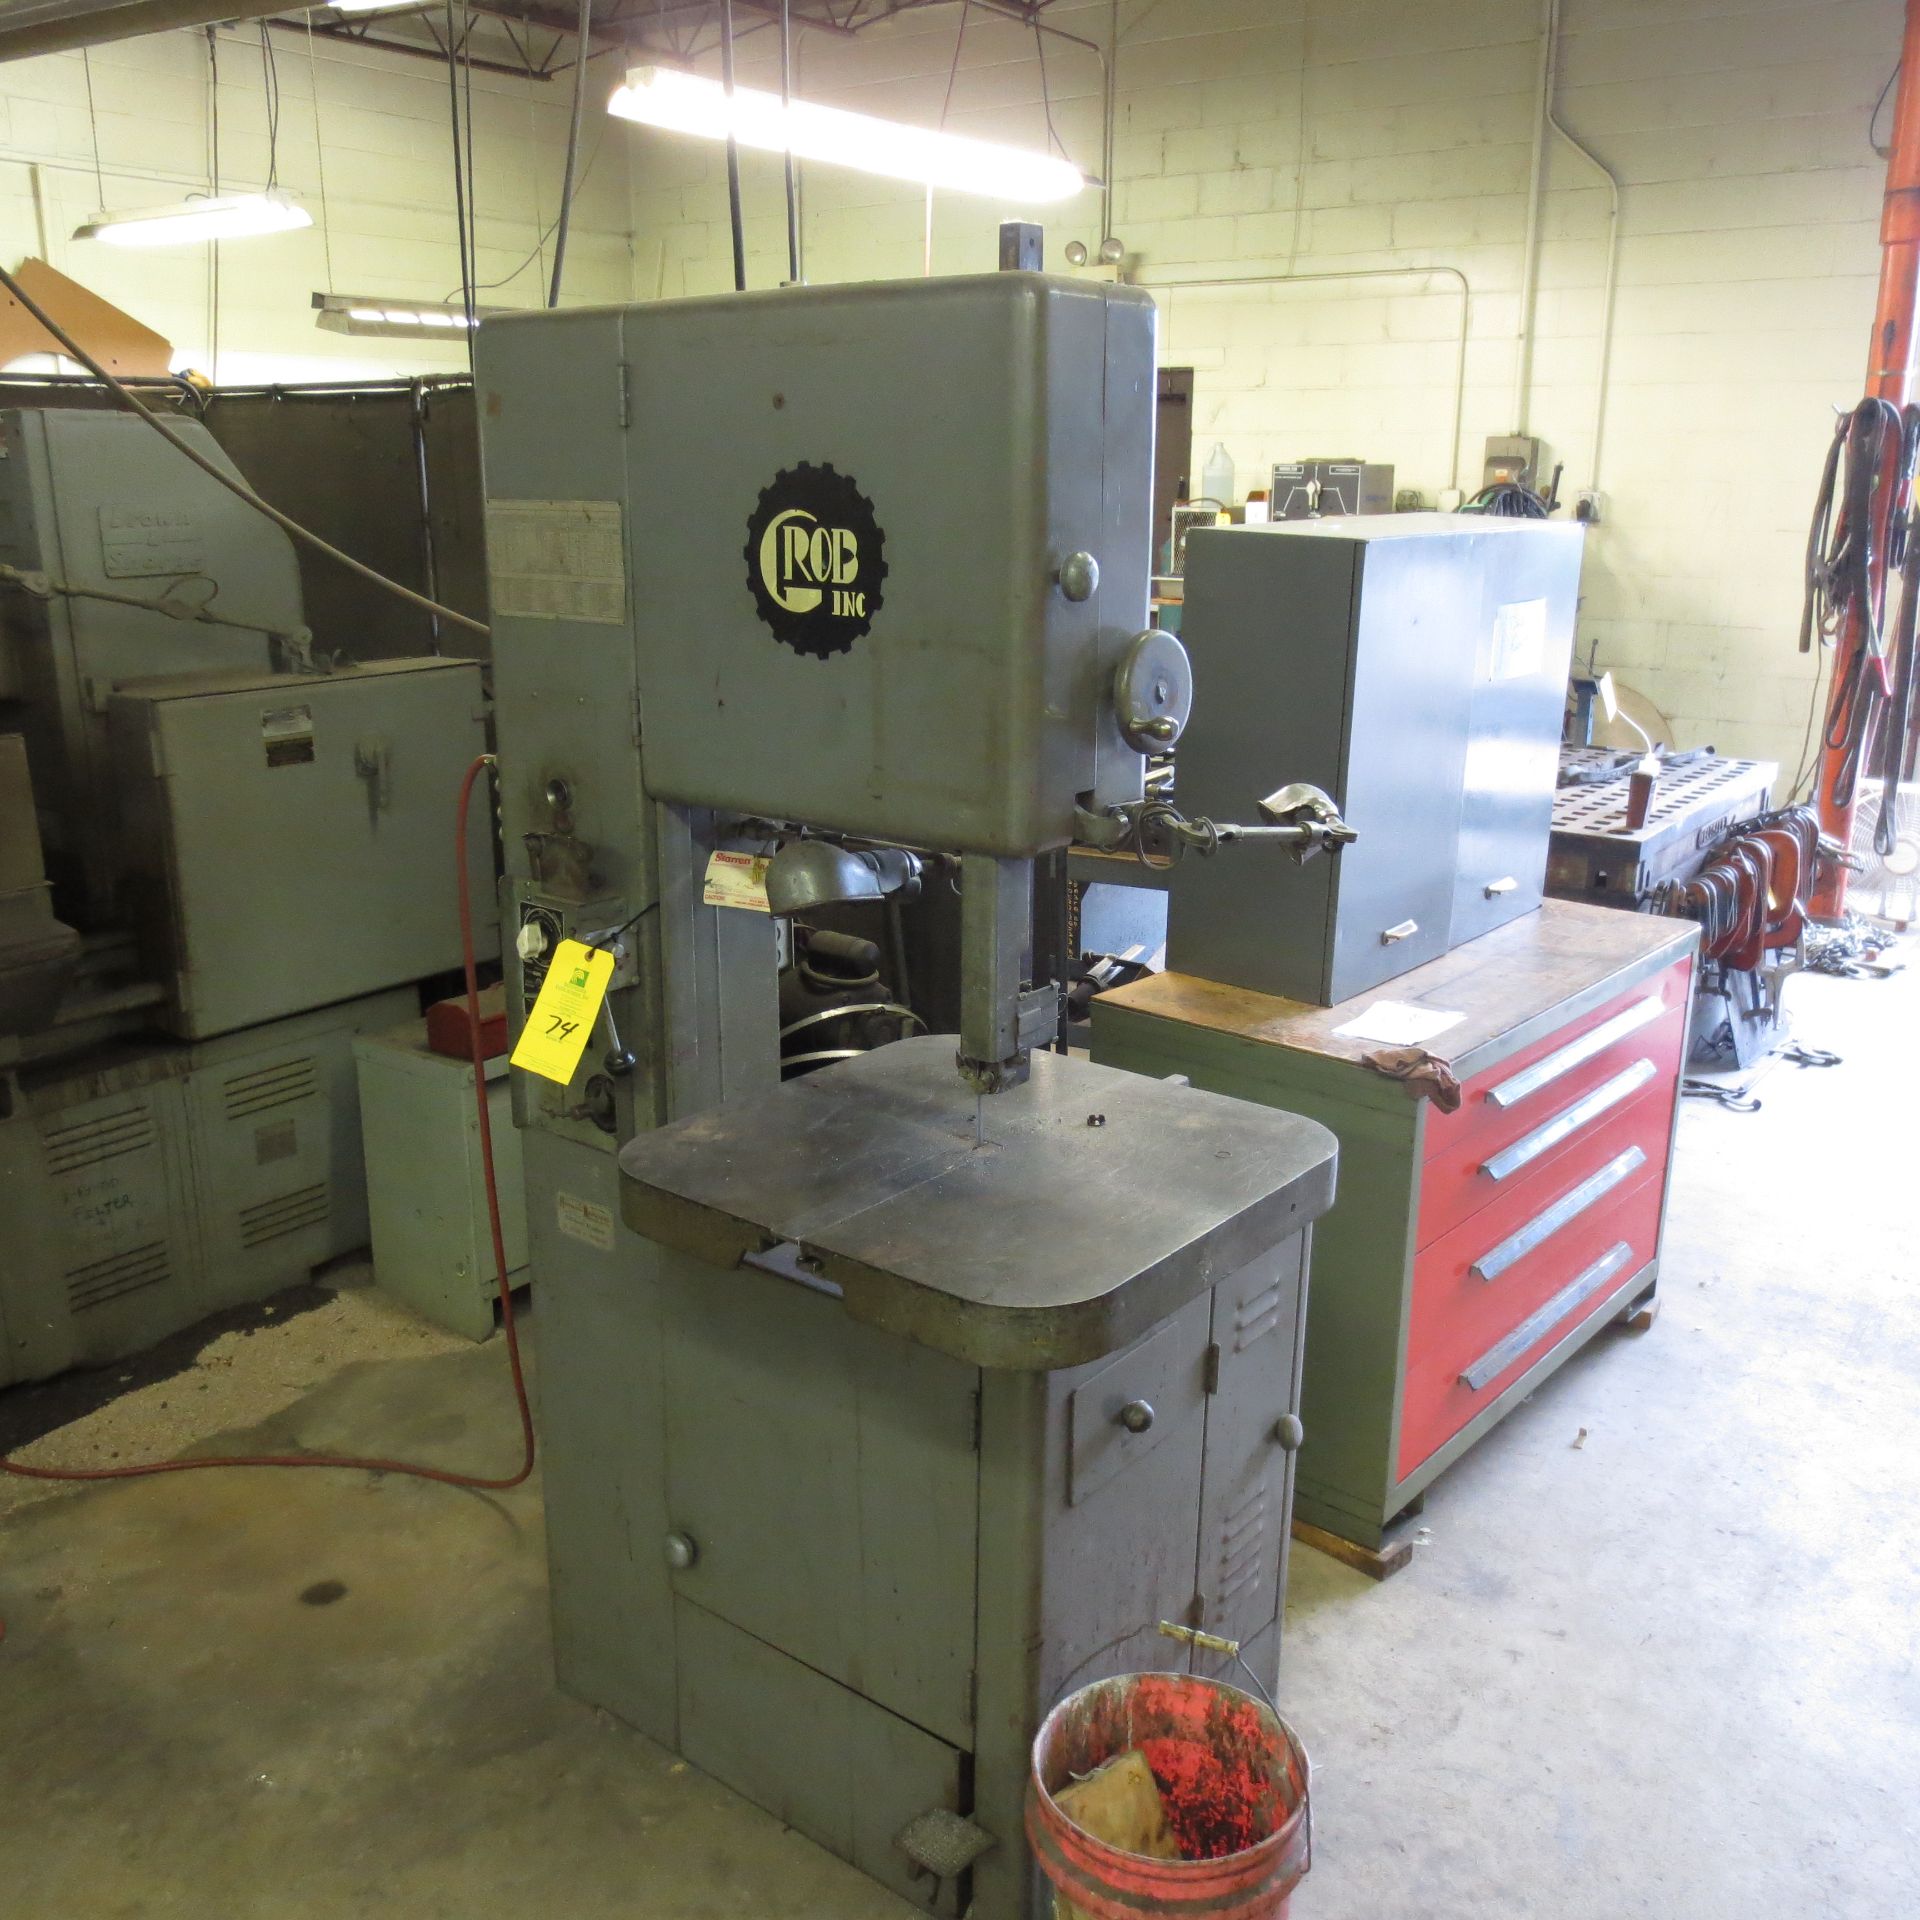 Grob NS 18 Vertical Band Saw, 18" Throat, S/N 8727, 24" X 24" Table with Blade Welder